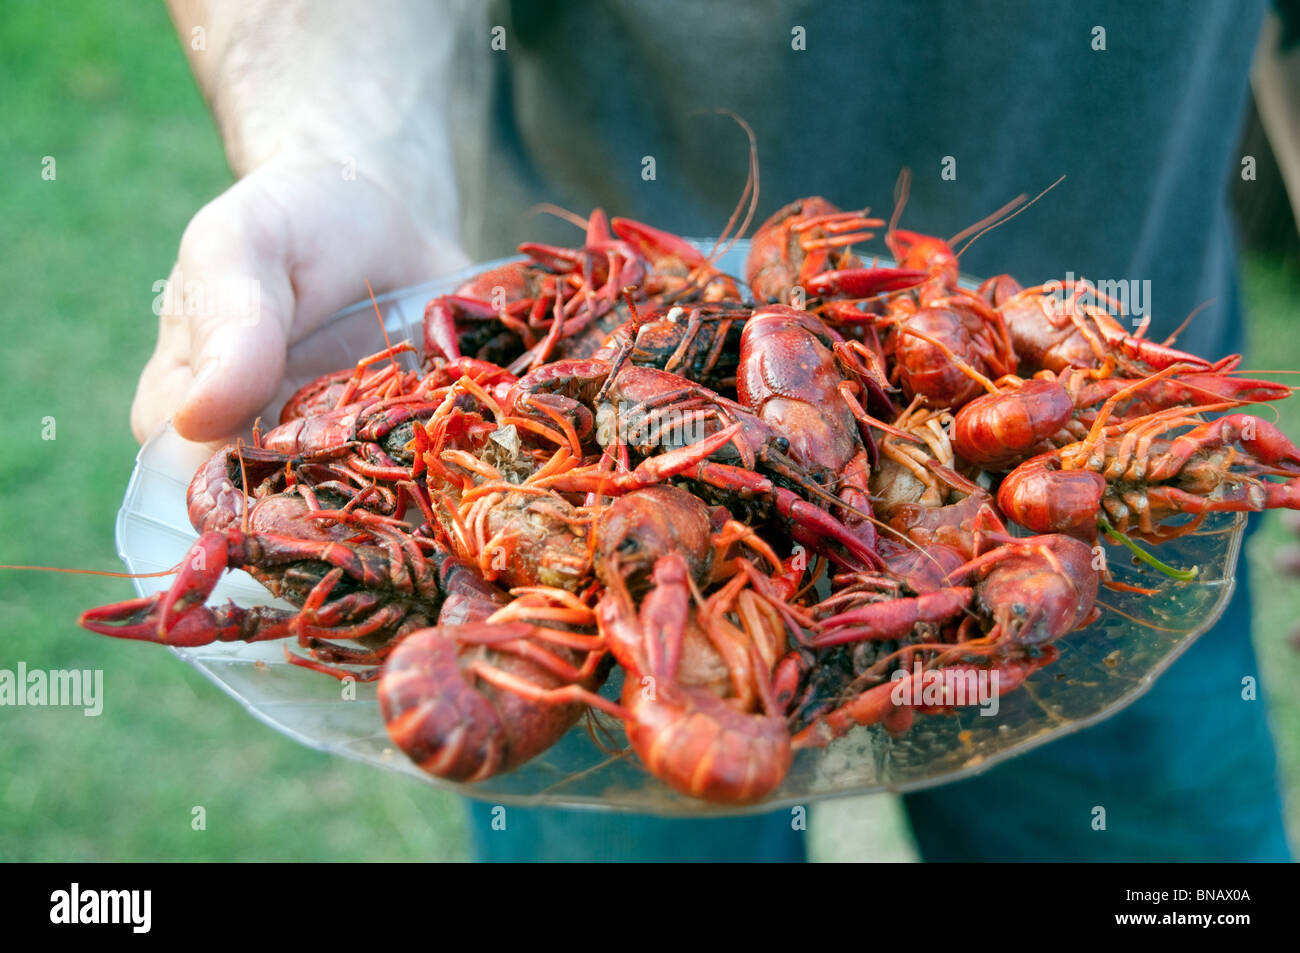 A man holding a plate of homemade spicy, boiled crawfish (or crayfish), in the town of Shreveport, Louisiana, in the southern United States. Stock Photo